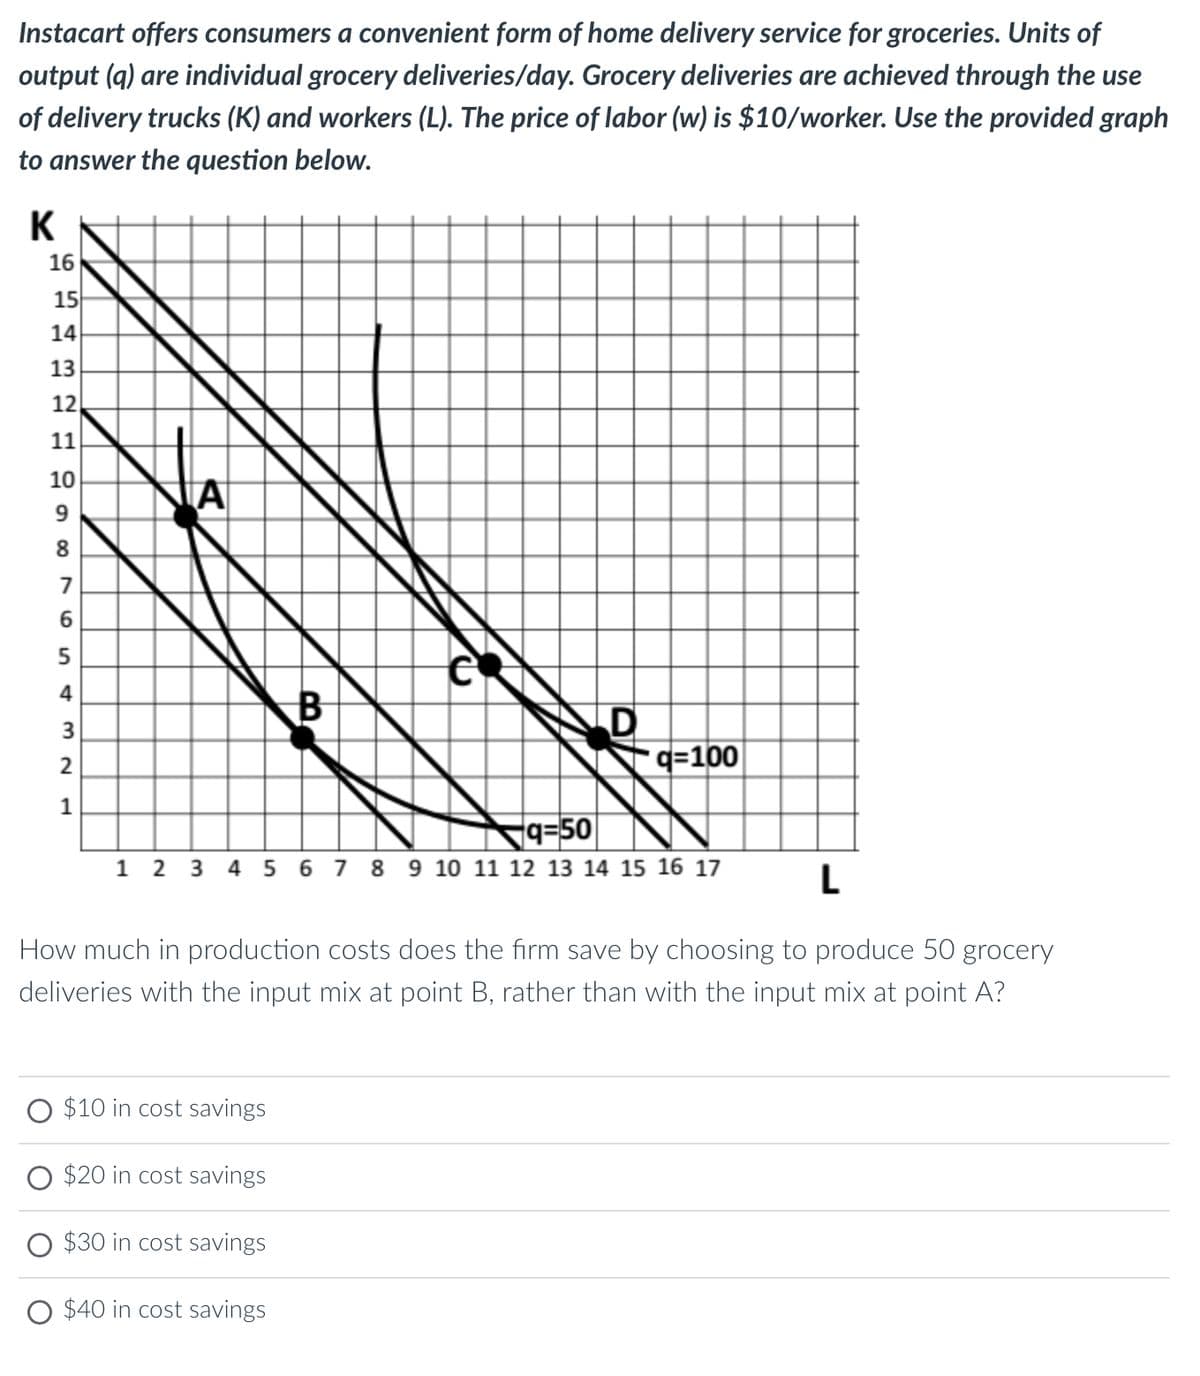 Instacart offers consumers a convenient form of home delivery service for groceries. Units of
output (q) are individual grocery deliveries/day. Grocery deliveries are achieved through the use
of delivery trucks (K) and workers (L). The price of labor (w) is $10/worker. Use the provided graph
to answer the question below.
K
16
15
14
432
13
12
11
10
9
8
00
7
6
5
432
1
B
C
O $10 in cost savings
$20 in cost savings
$30 in cost savings
O $40 in cost savings
D
q=100
q=50
1 2 3 4 5 6 7 8 9 10 11 12 13 14 15 16 17
L
How much in production costs does the firm save by choosing to produce 50 grocery
deliveries with the input mix at point B, rather than with the input mix at point A?